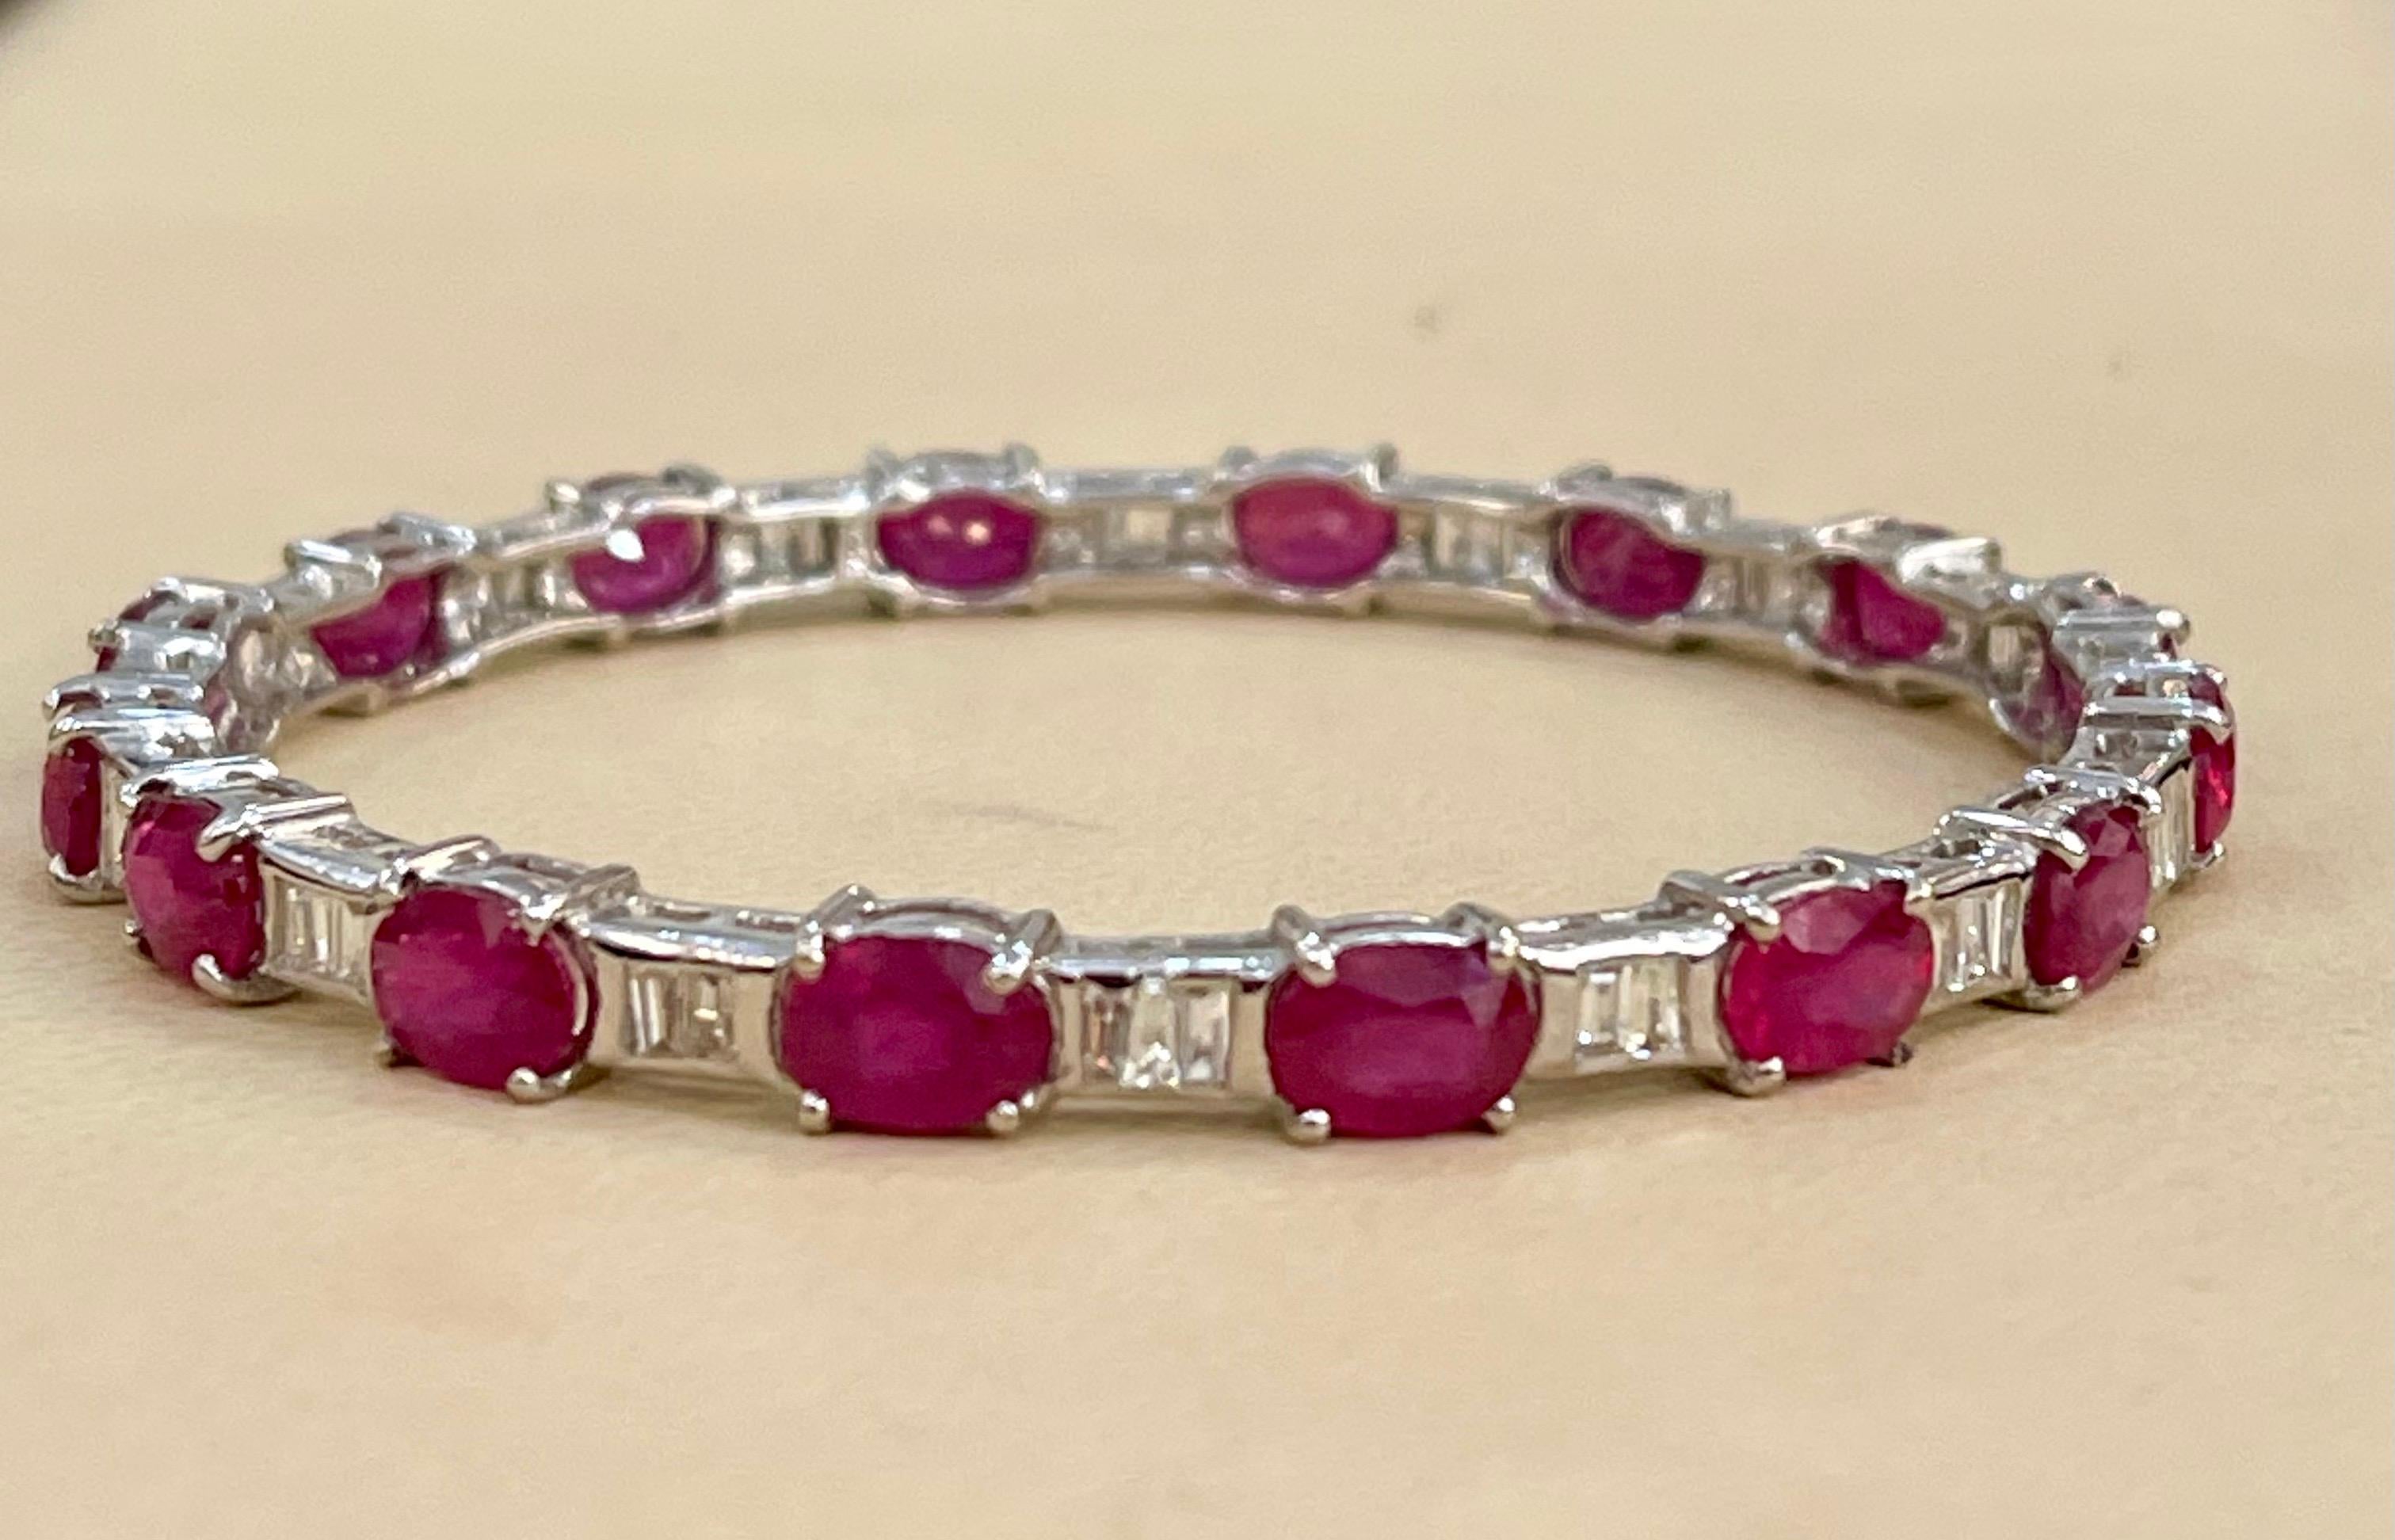  16 Carat Oval Treated Ruby & Diamonds 18 Karat White  Gold 19 Grams Bangle 
It features a bangle crafted with  18 karat White gold and  Baguettes cut diamonds 
Rubies  16 pieces , each  5 X 7  MM approximately 1.0 ct each , total weight 16